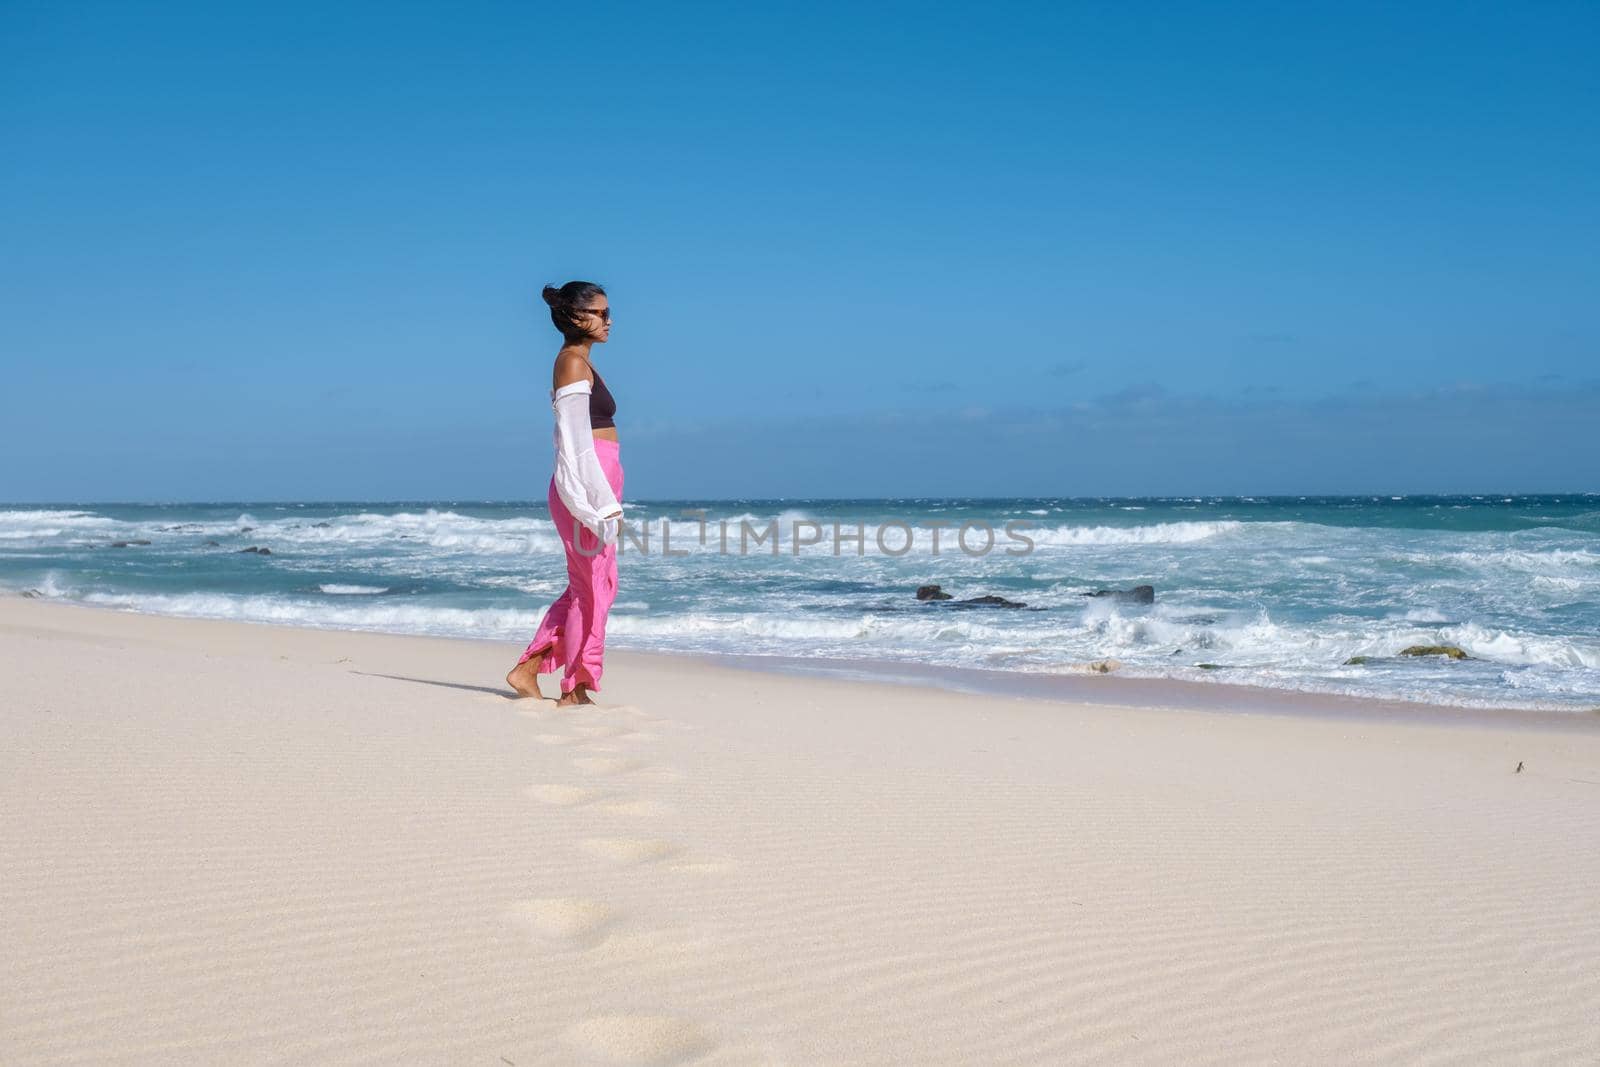 Women walking at the beach De Hoop Nature reserve South Africa Western Cape, the Most beautiful beach of south Africa with the white dunes at the de hoop nature reserve which part of the garden route